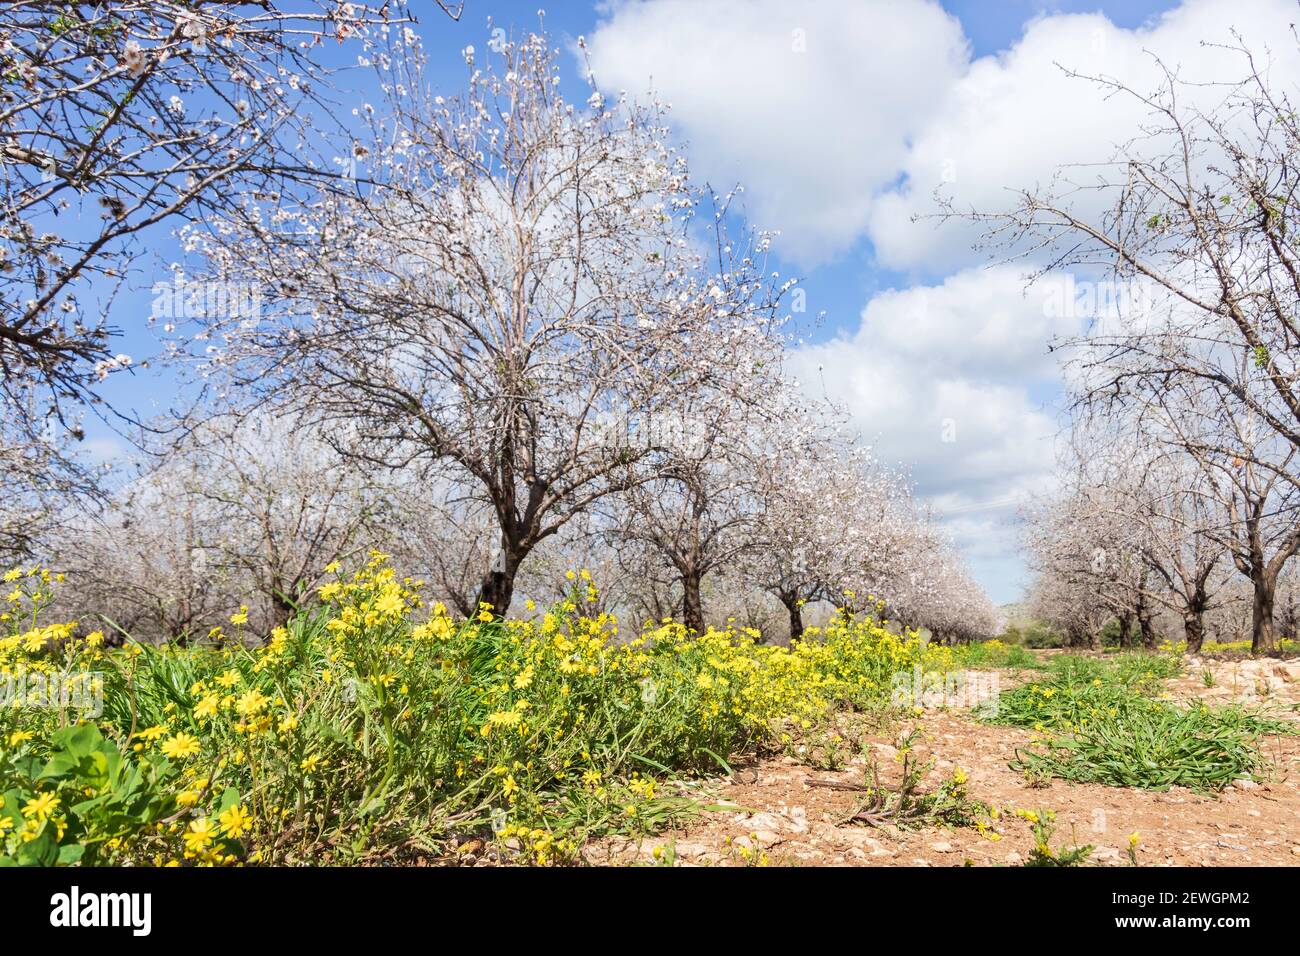 Yellow flowers between rows of flowering almond trees in an orchard against a sky with clouds Stock Photo